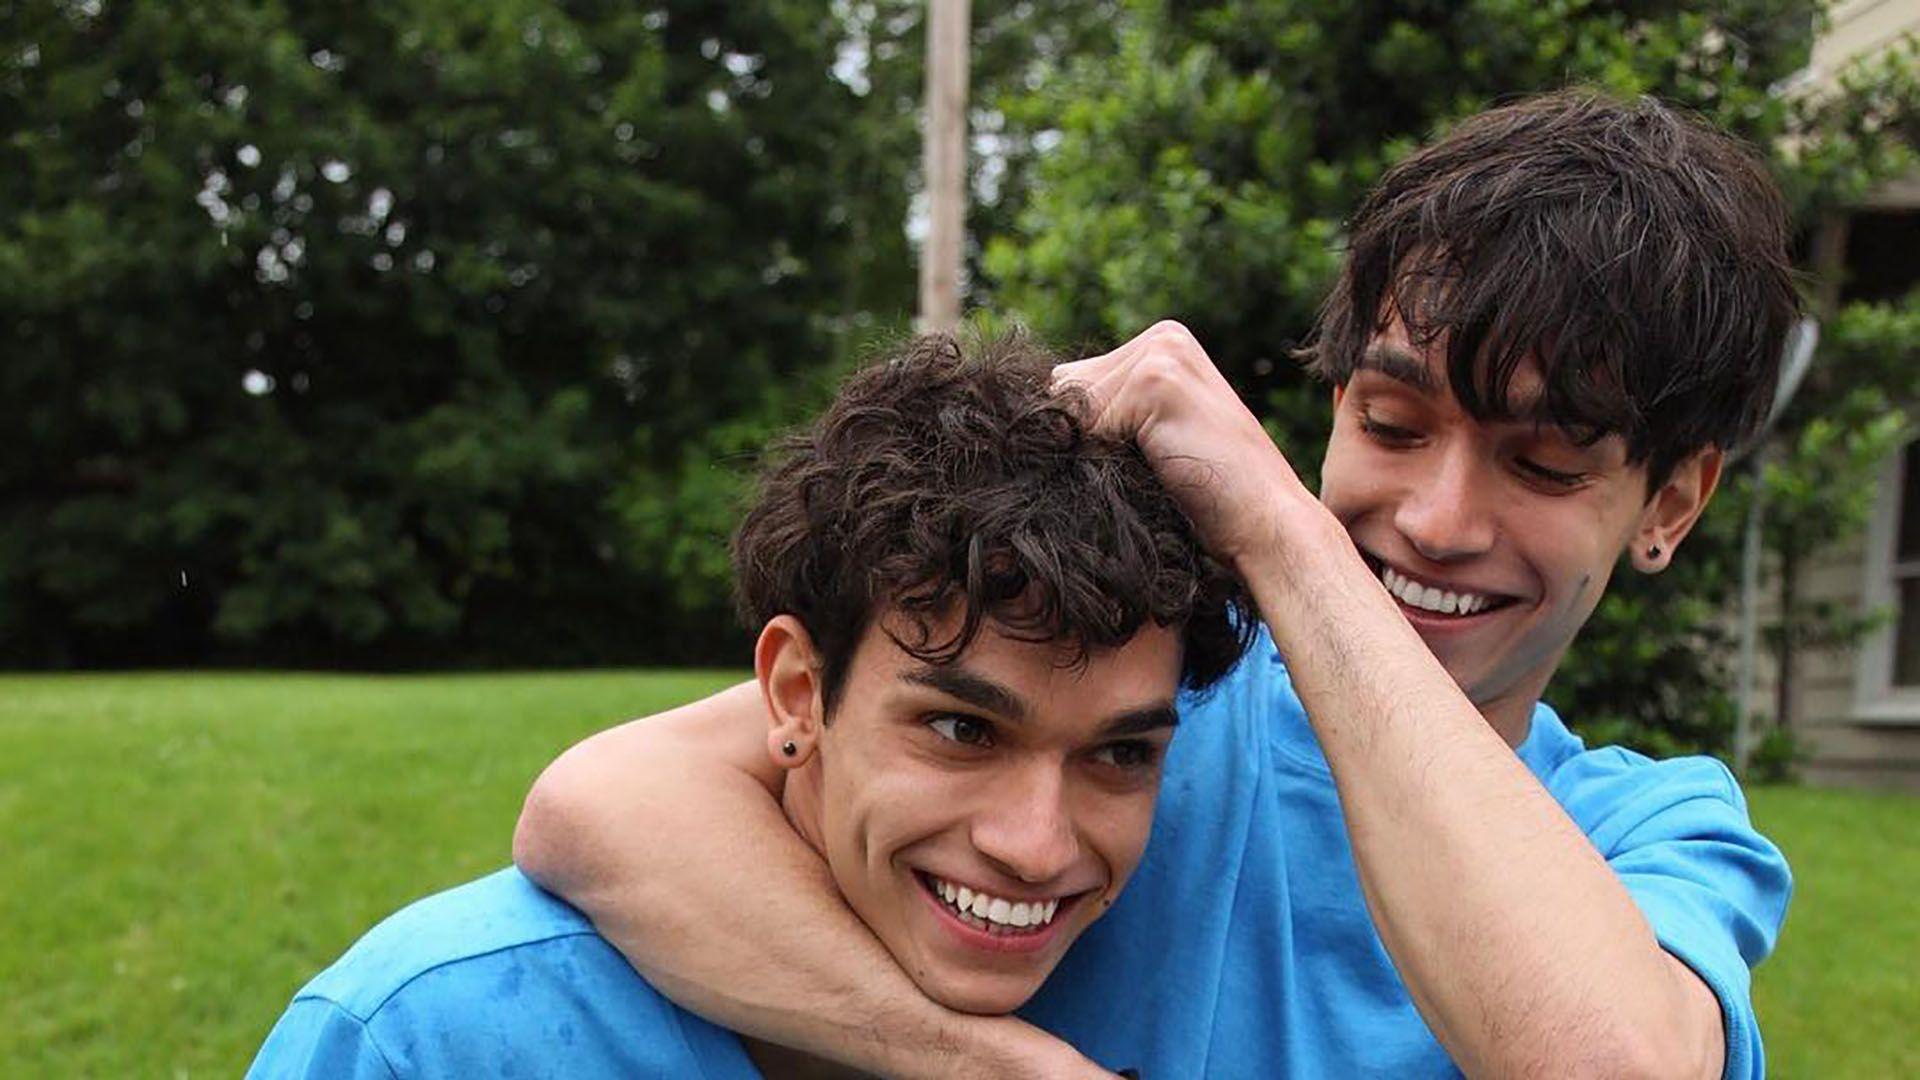 Lucas and Marcus Wallpapers - Top Free Lucas and Marcus Backgrounds ...